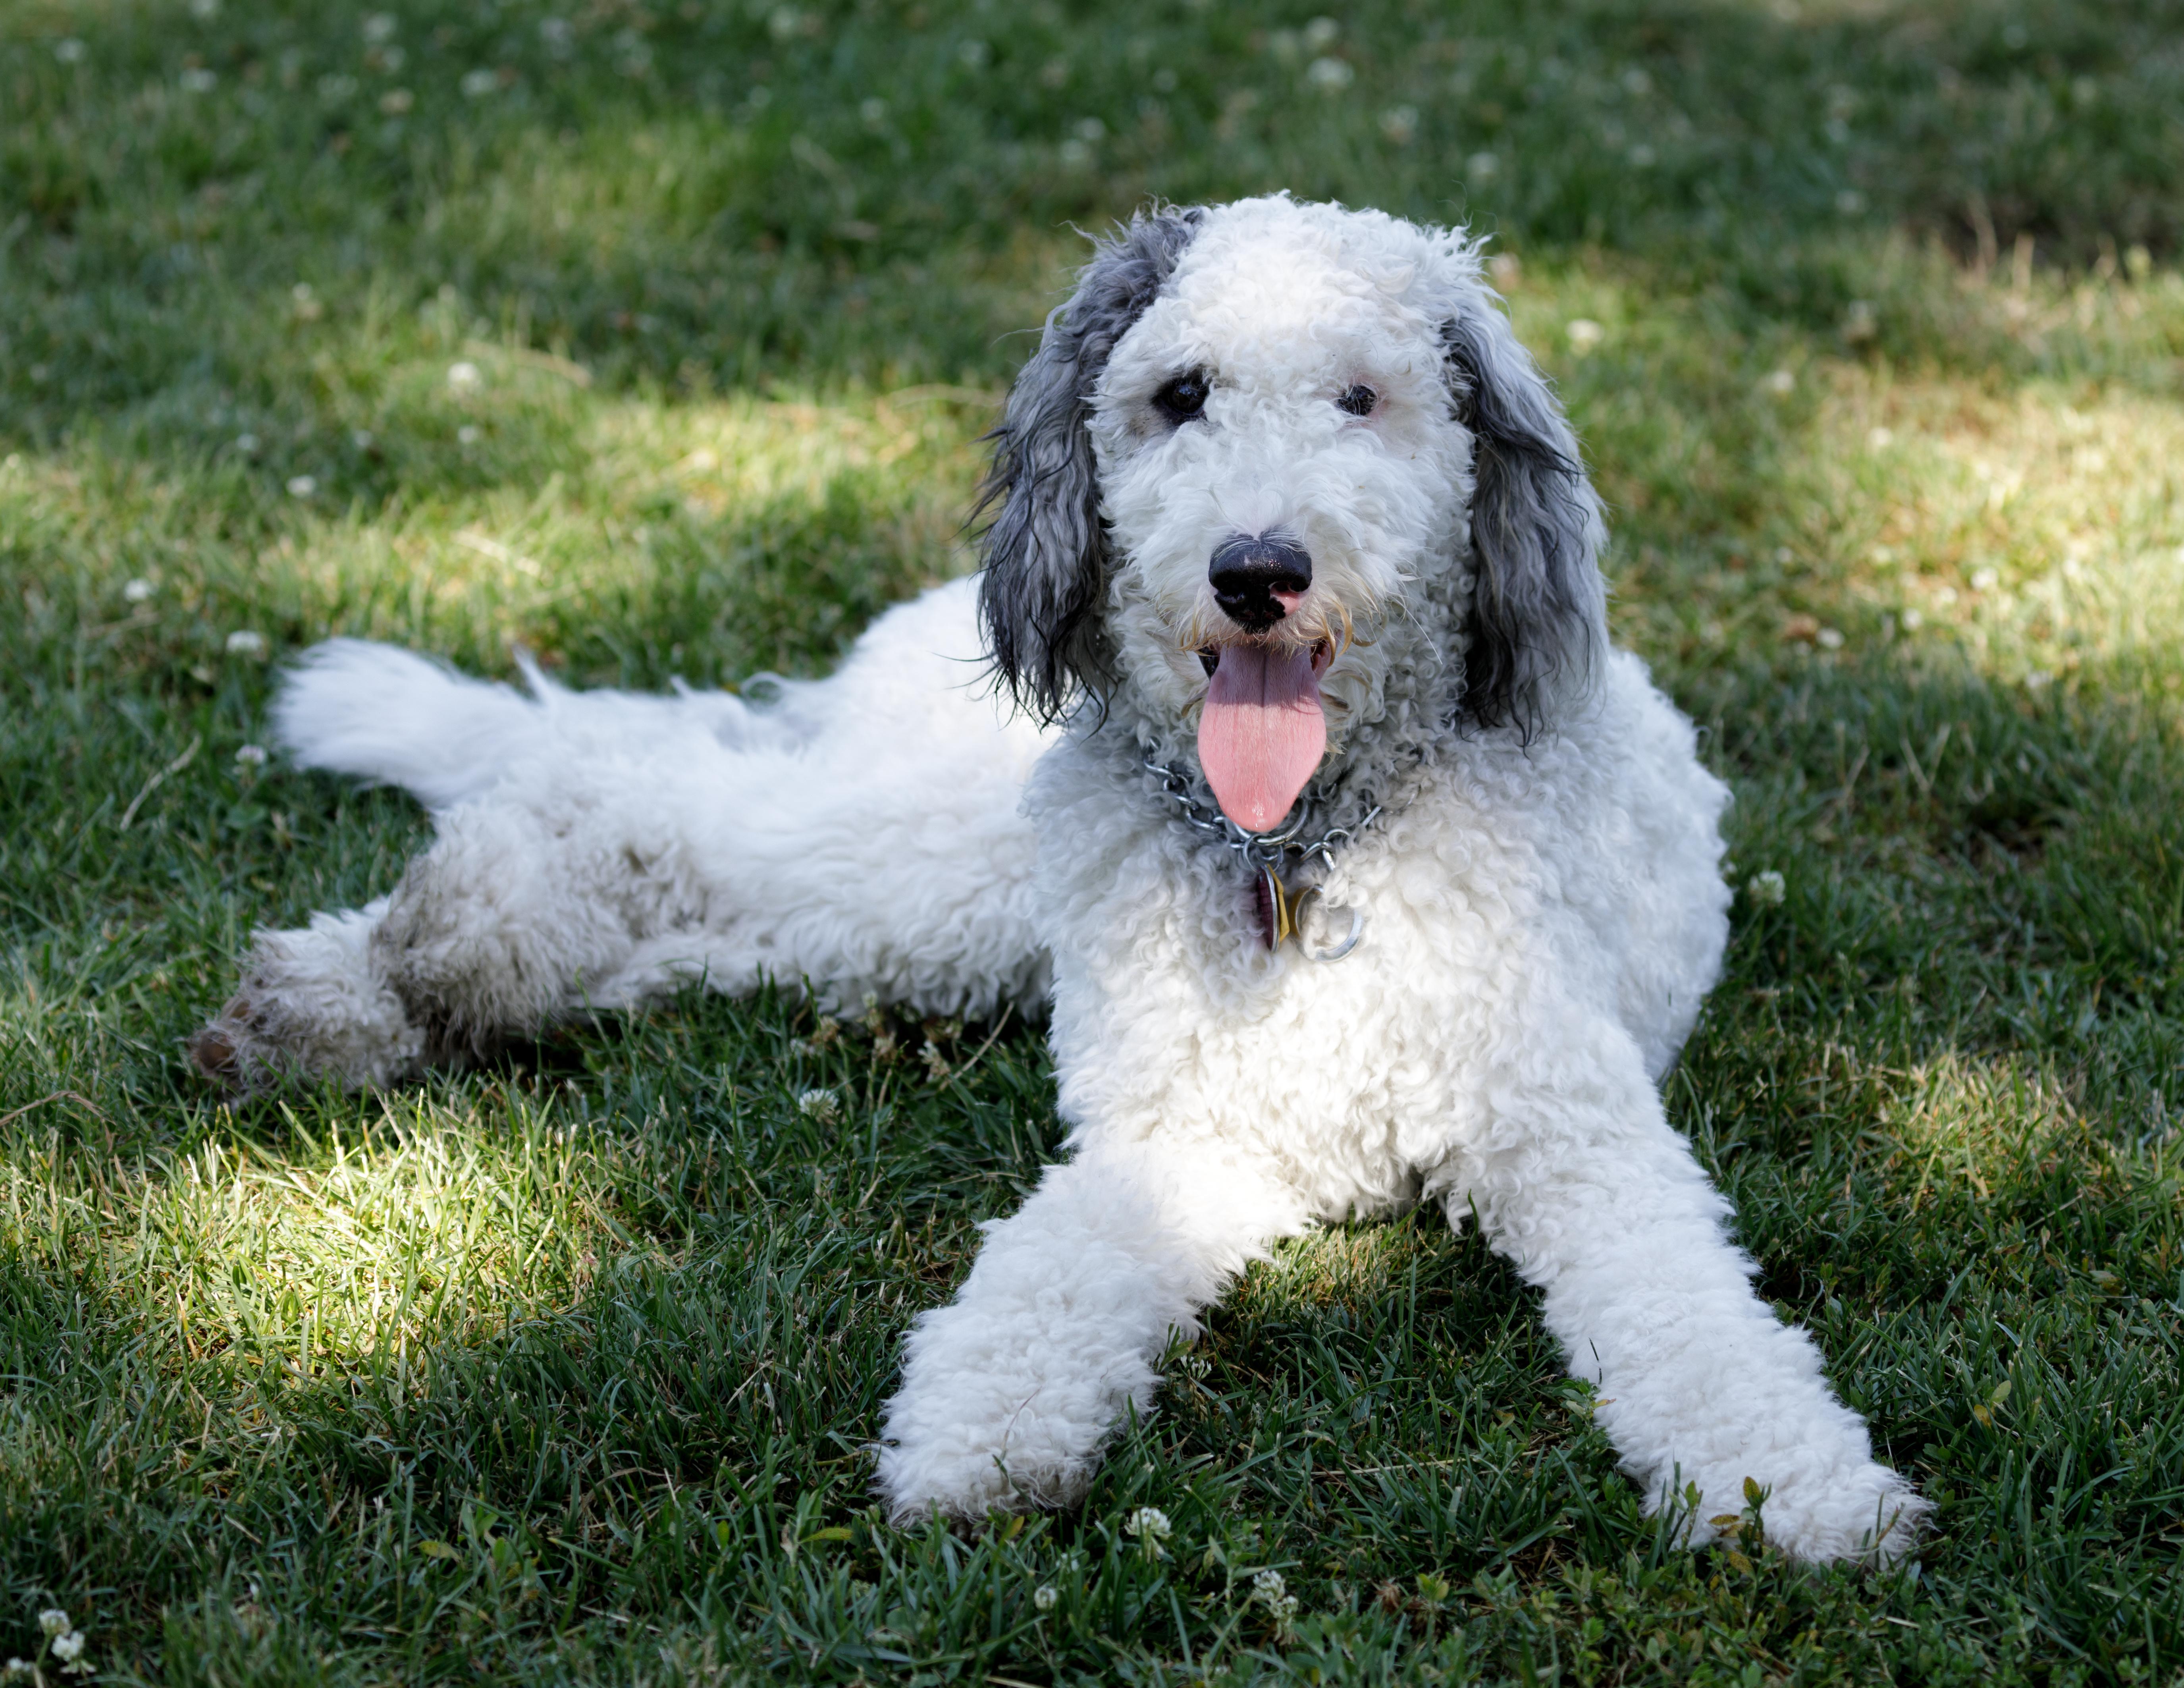 White bernadoodle relaxing outside on the grass.